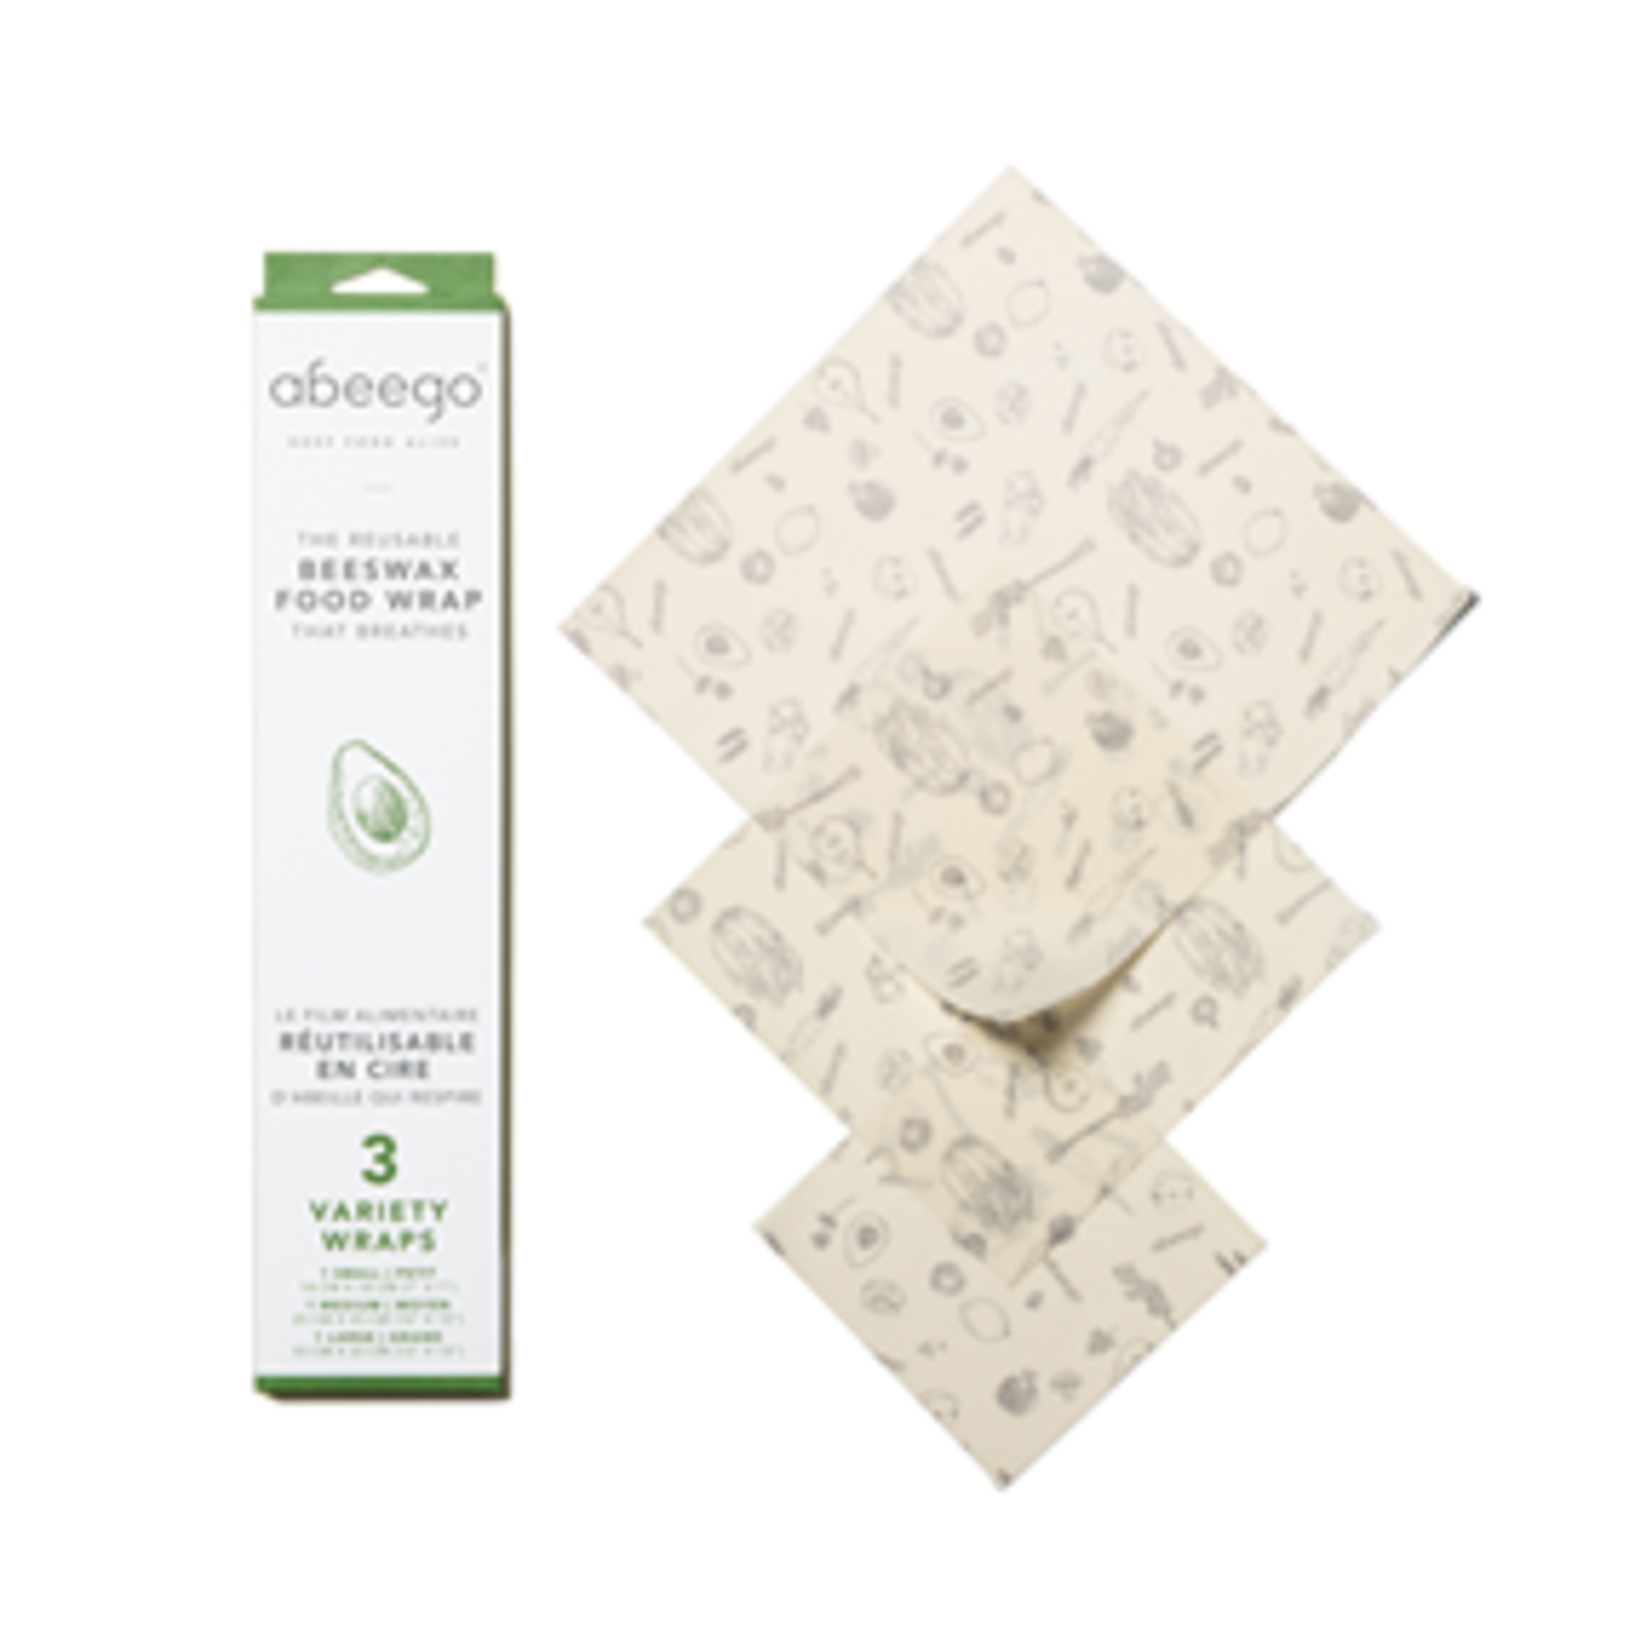 ABEEGO ABEEGO BEESWAX FOOD WRAP (VARIETY PACK)